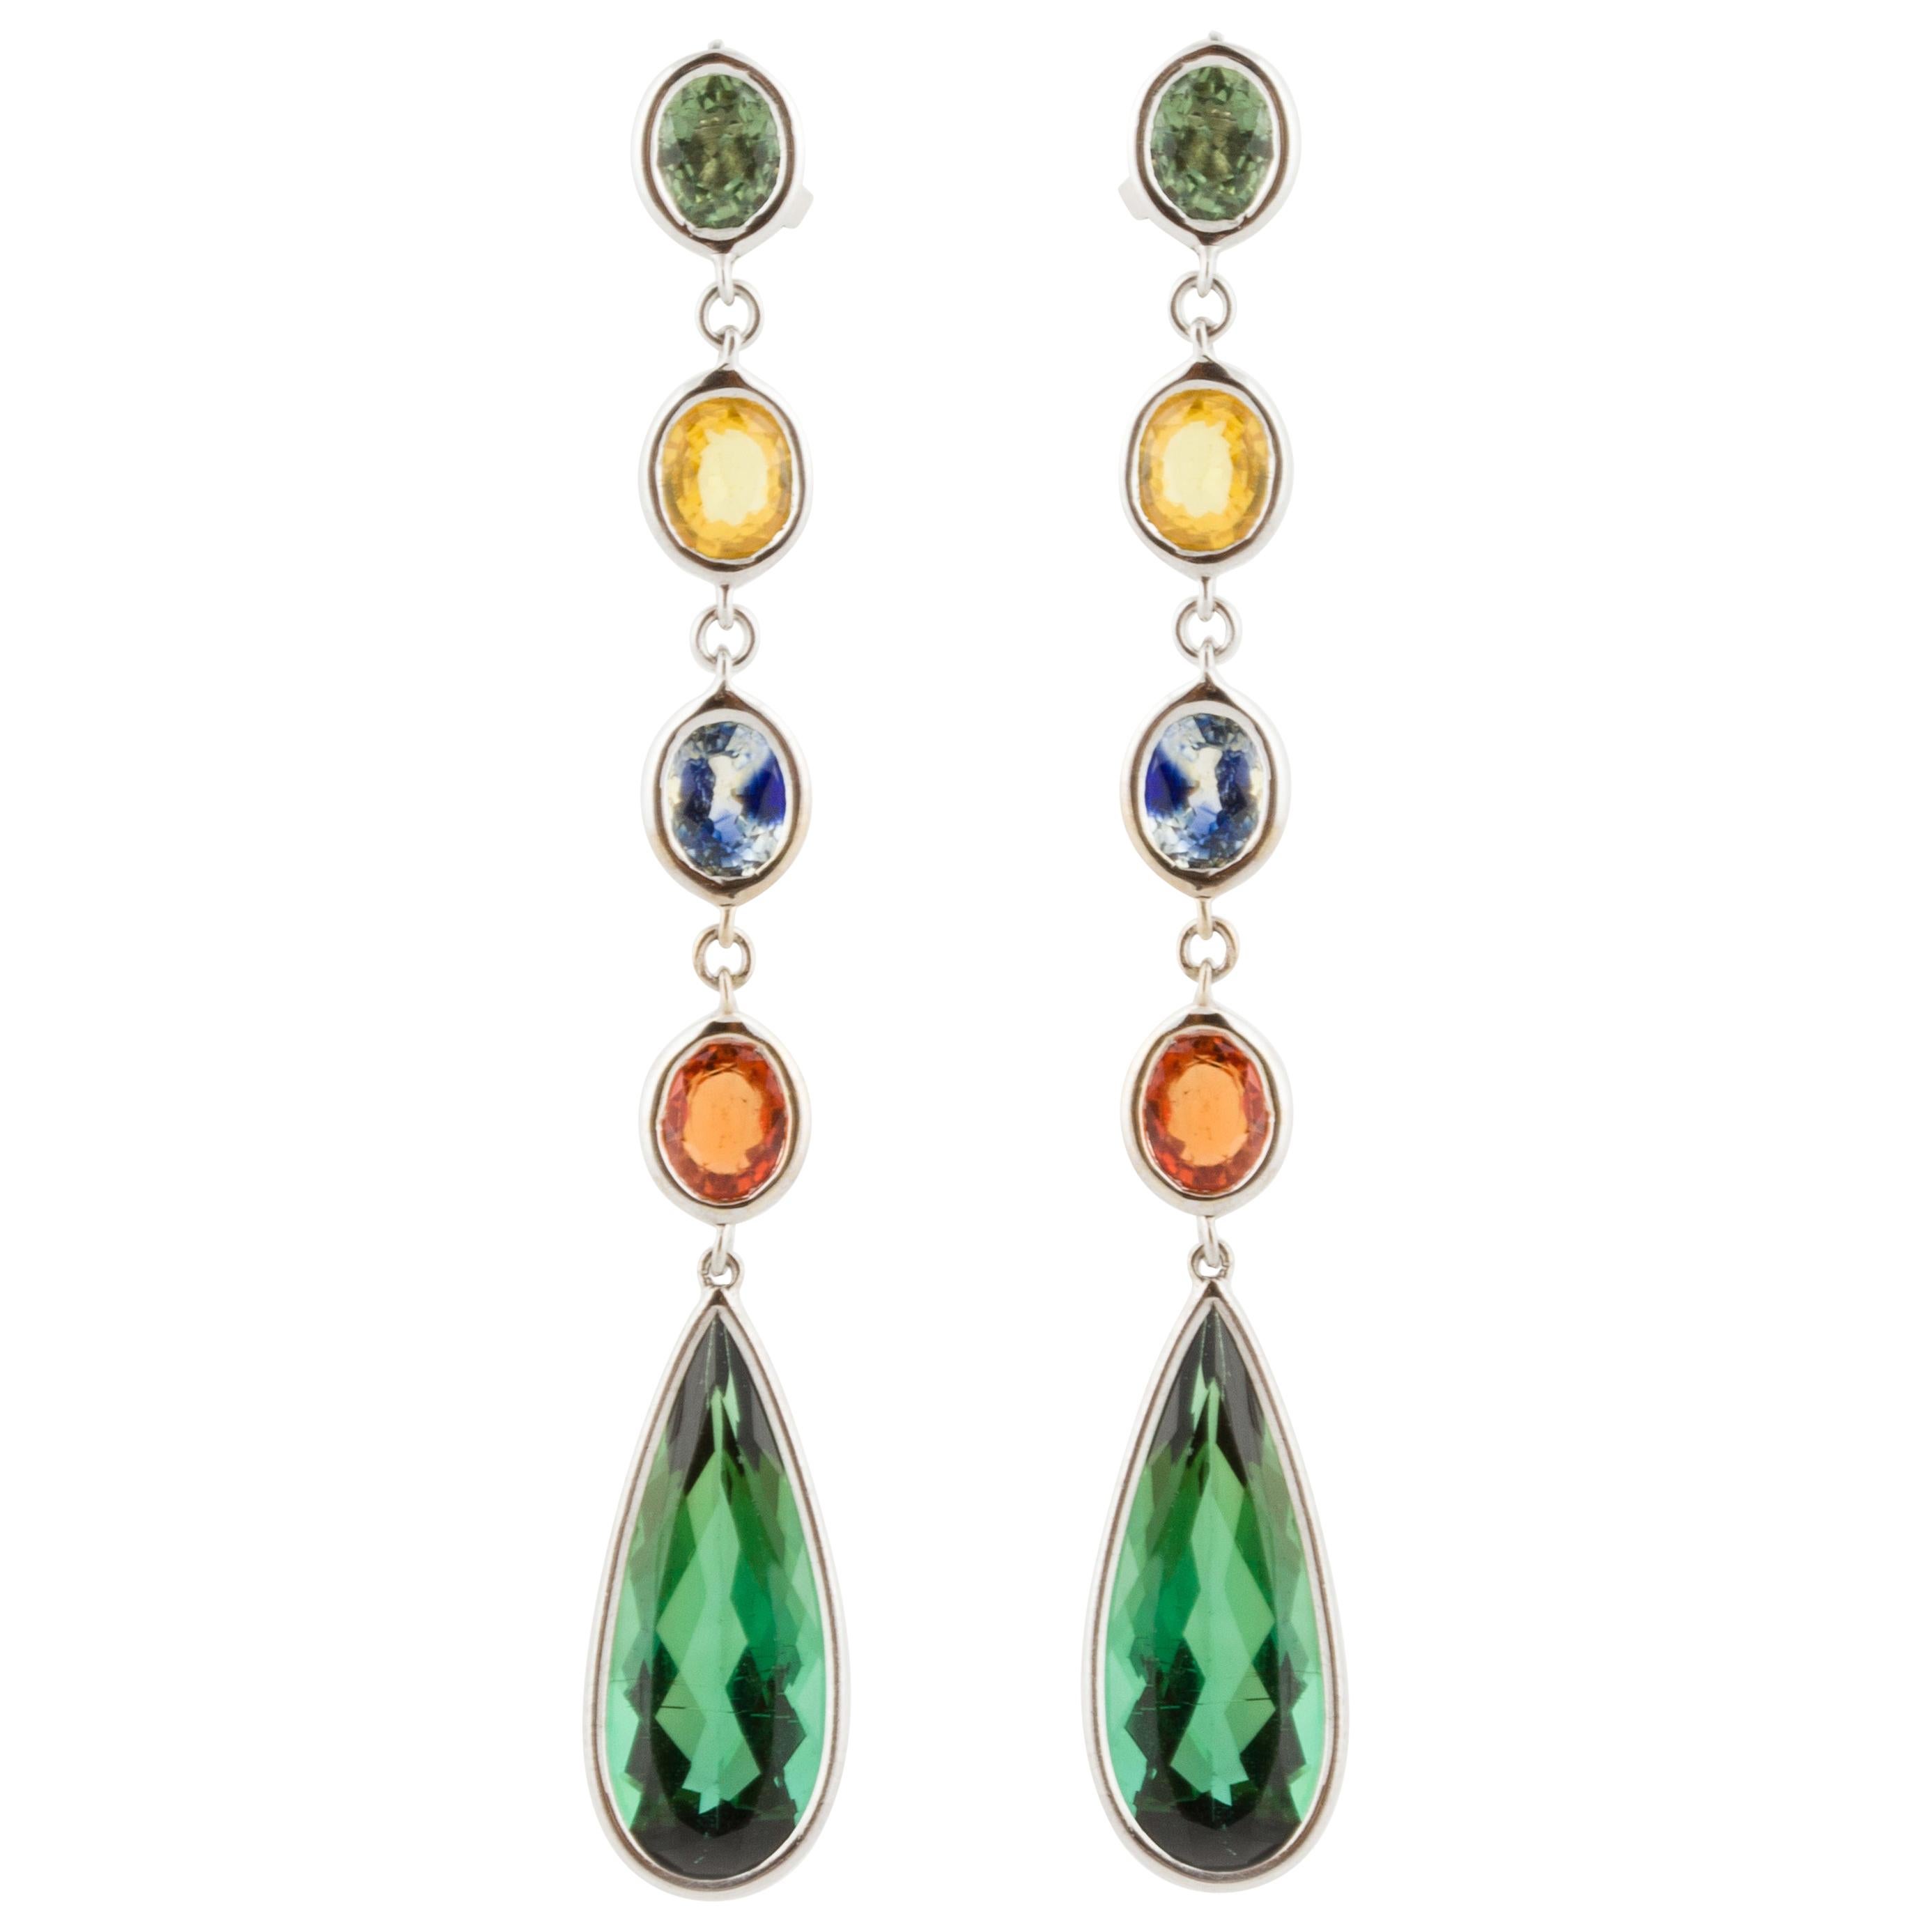 Multi-Colored Sapphire and Tourmaline Drop Earrings in 18K White Gold